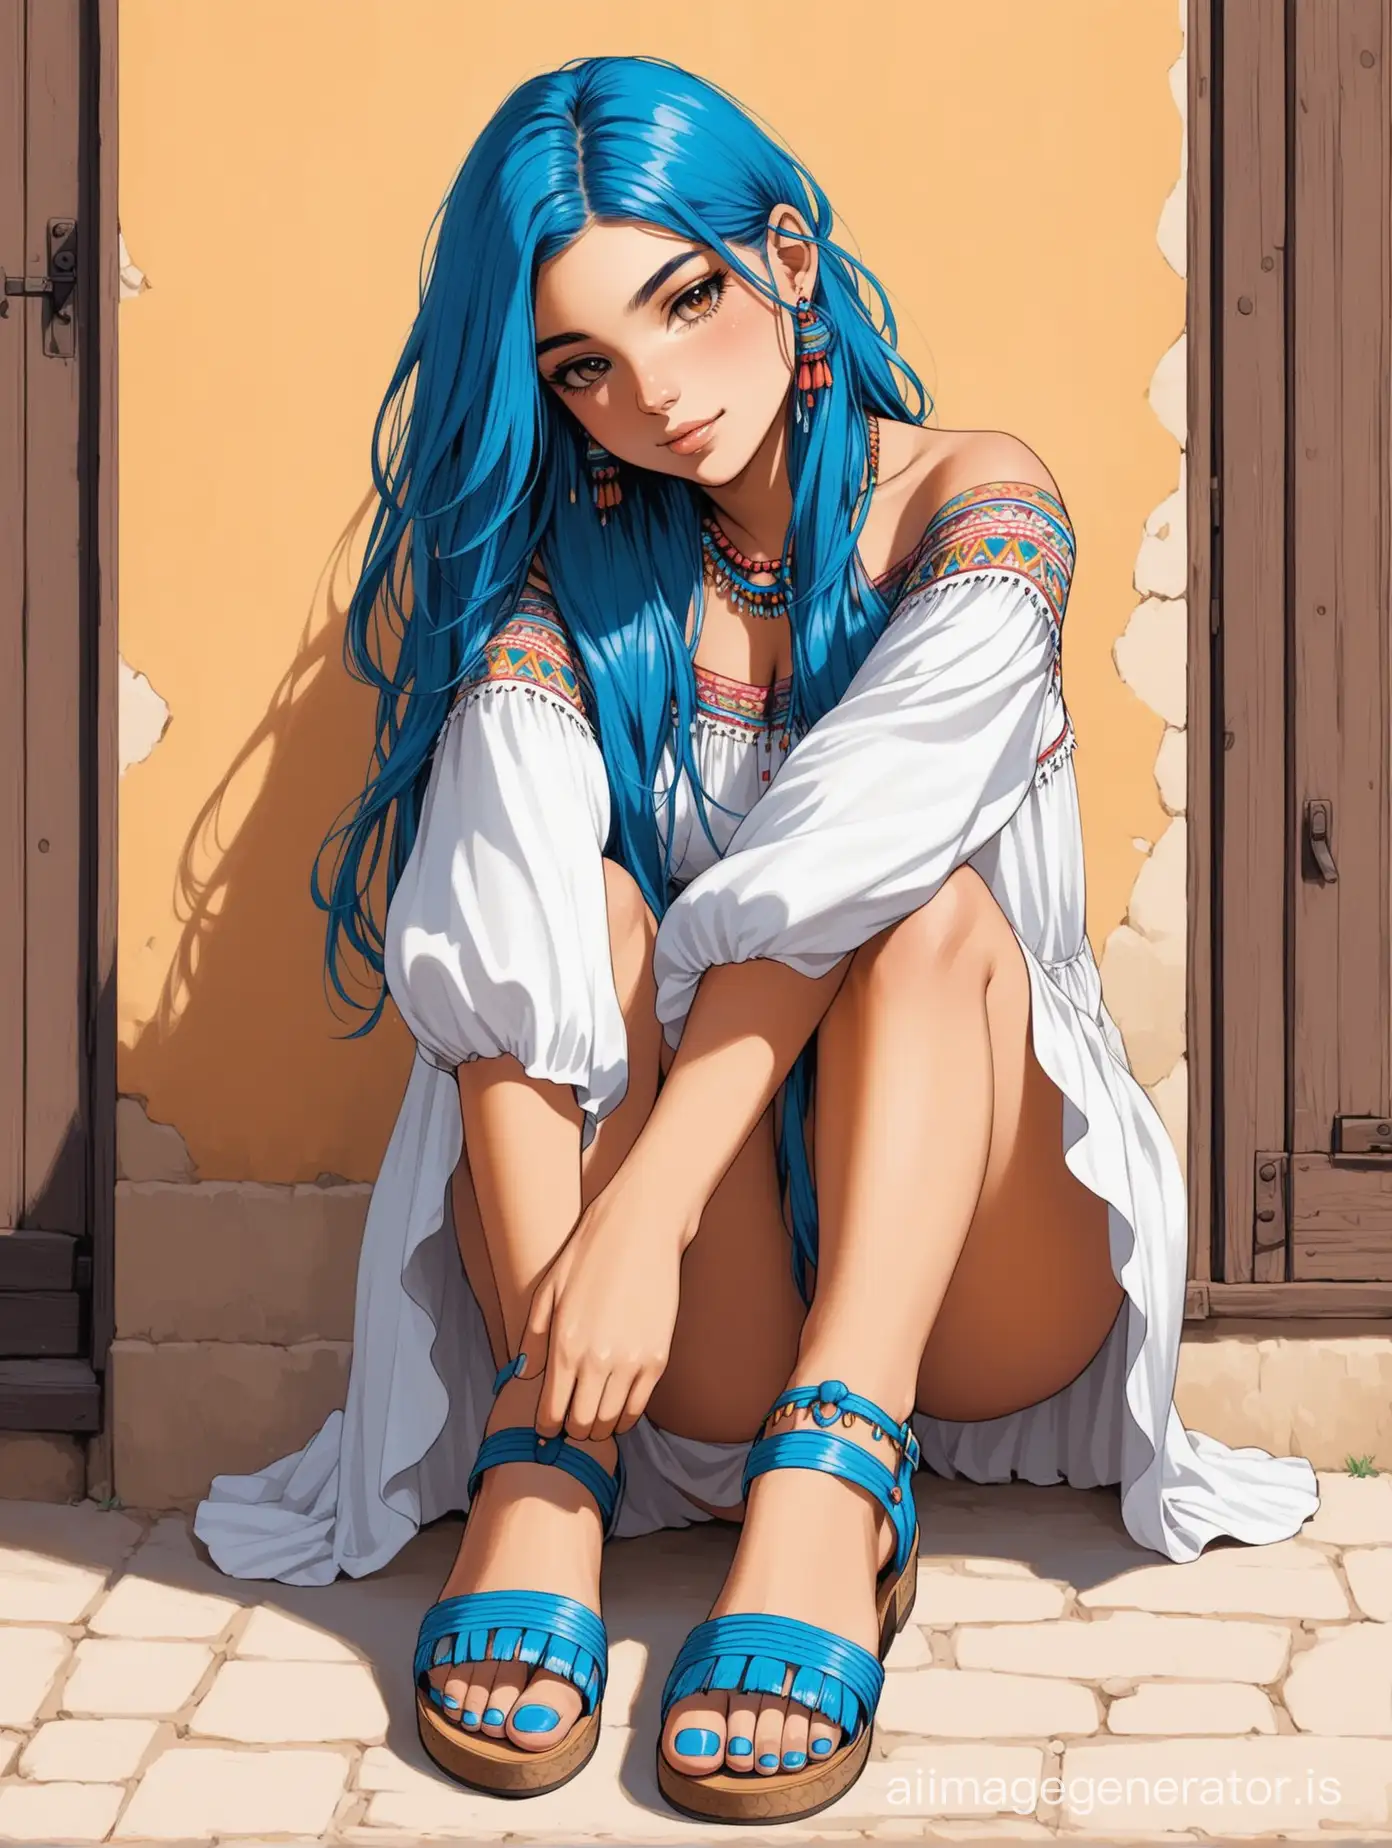 Gipsy girl with blue hair wearing closed toe sandals